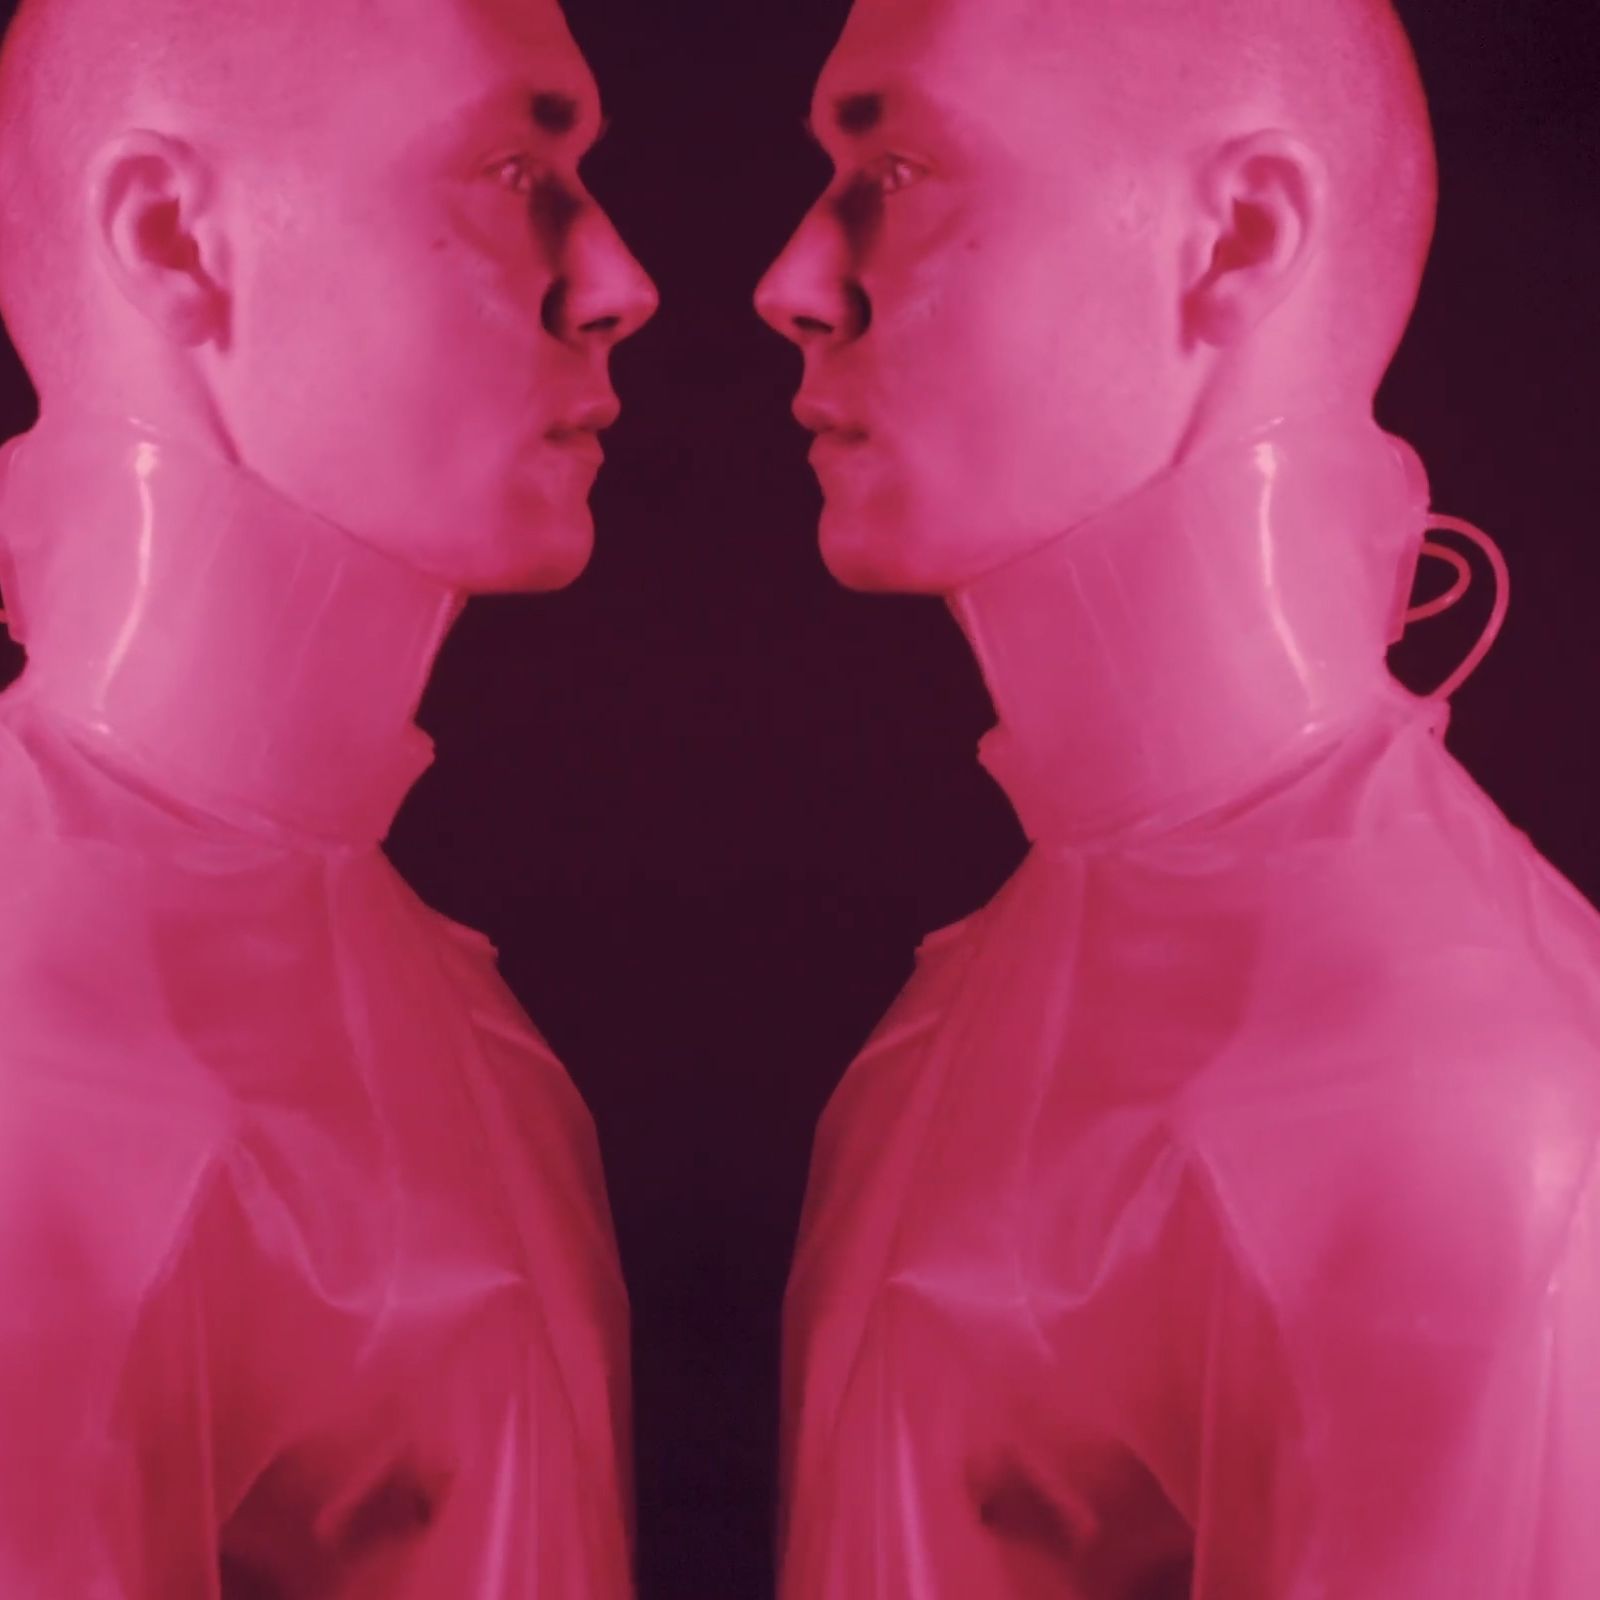 Two male models in pink atmospheric light.